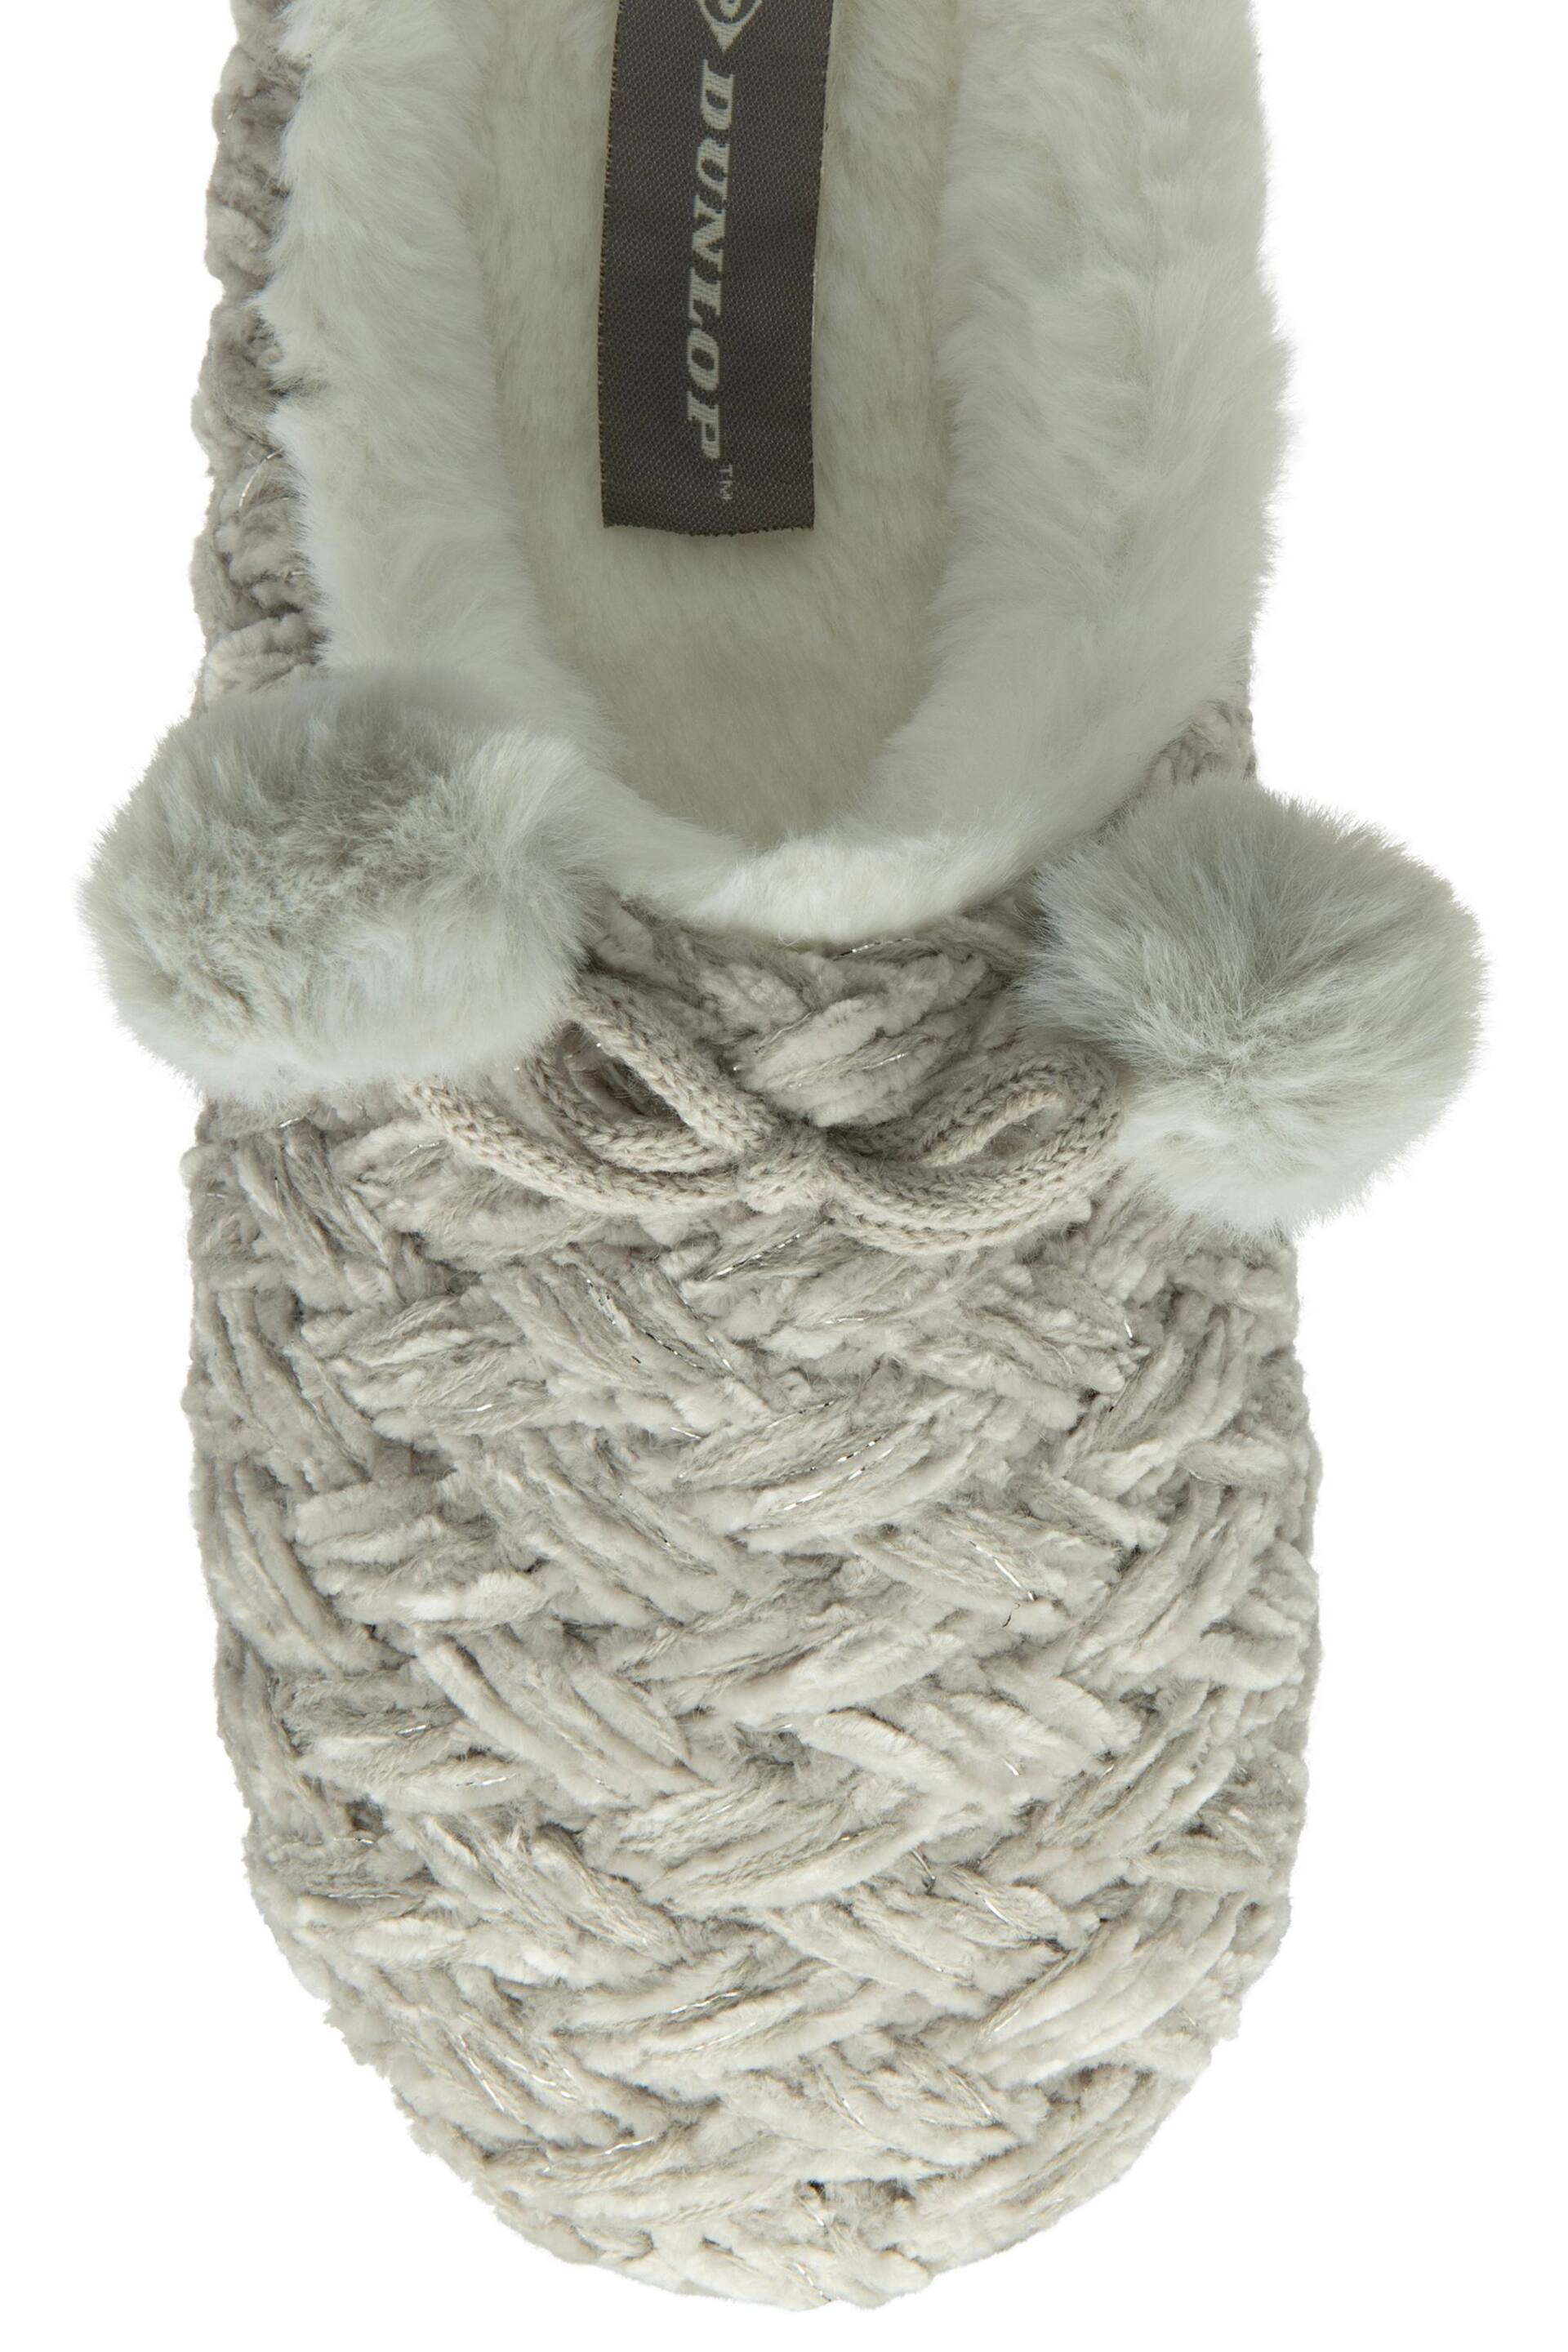 Dunlop Grey Ladies Knitted Closed Toe Mule Slippers - Image 4 of 4